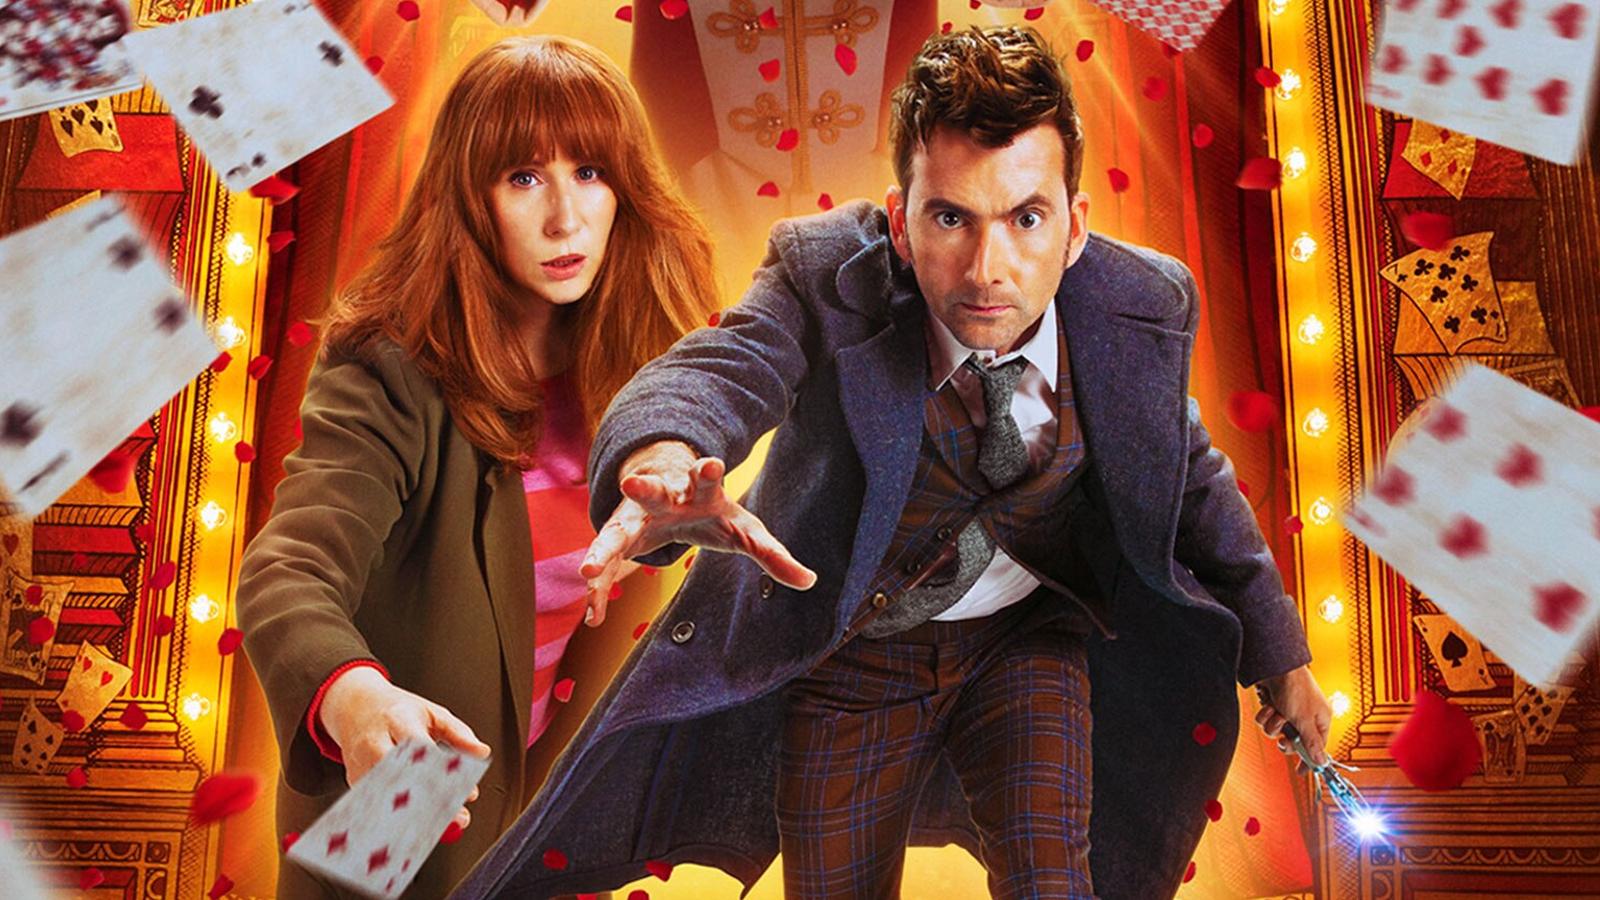 Cropped poster artwork for Doctor Who special, "The Giggle"